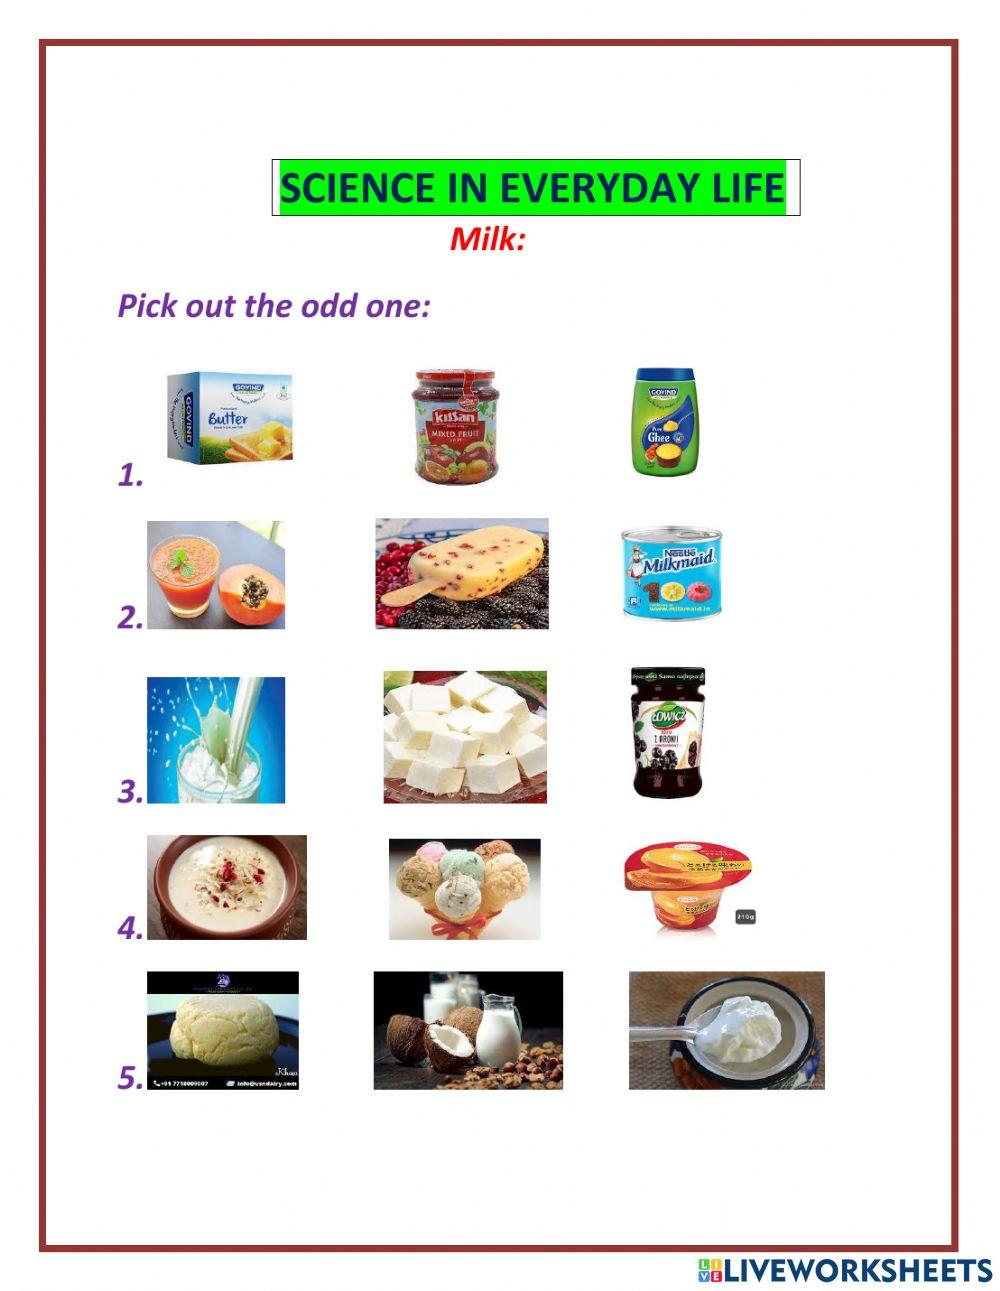 Science in everyday life